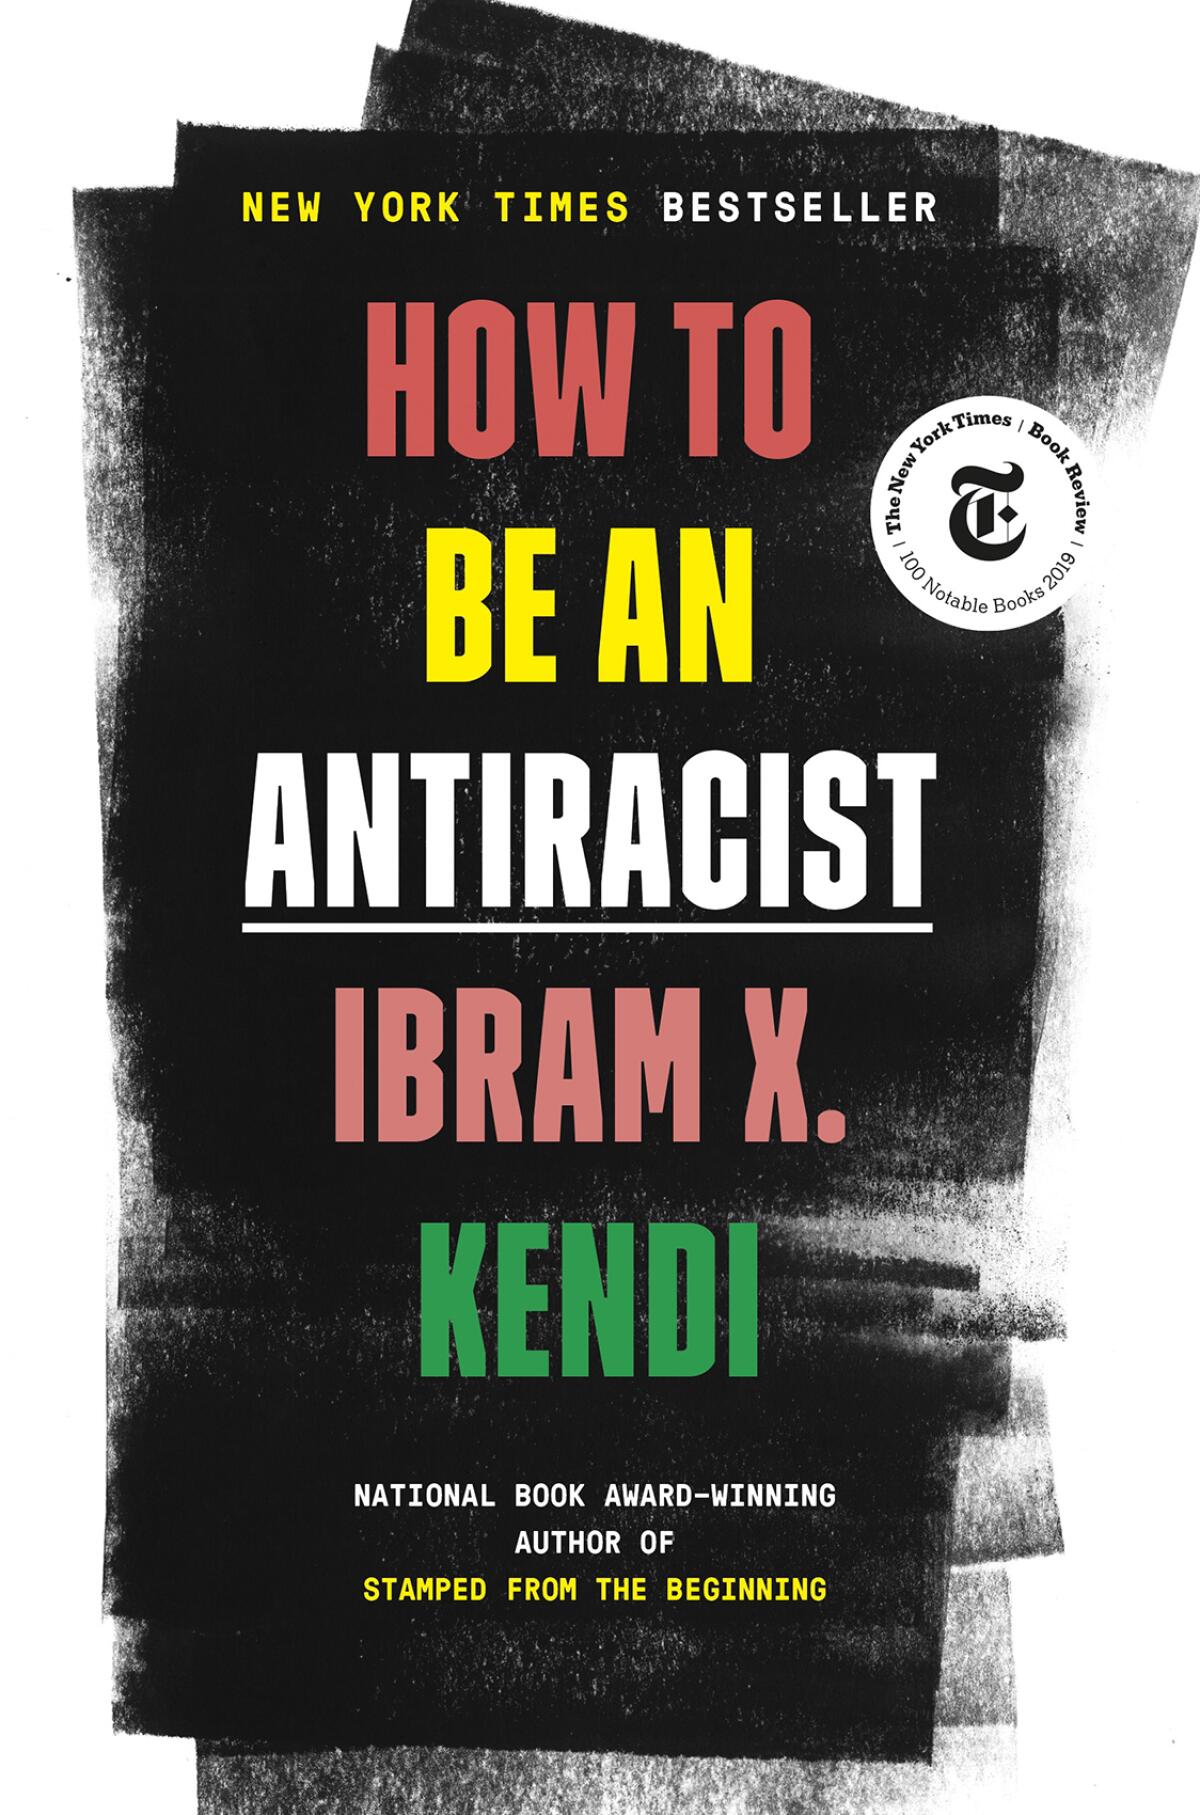 "How to Be an Antiracist" by Ibram X. Kendi